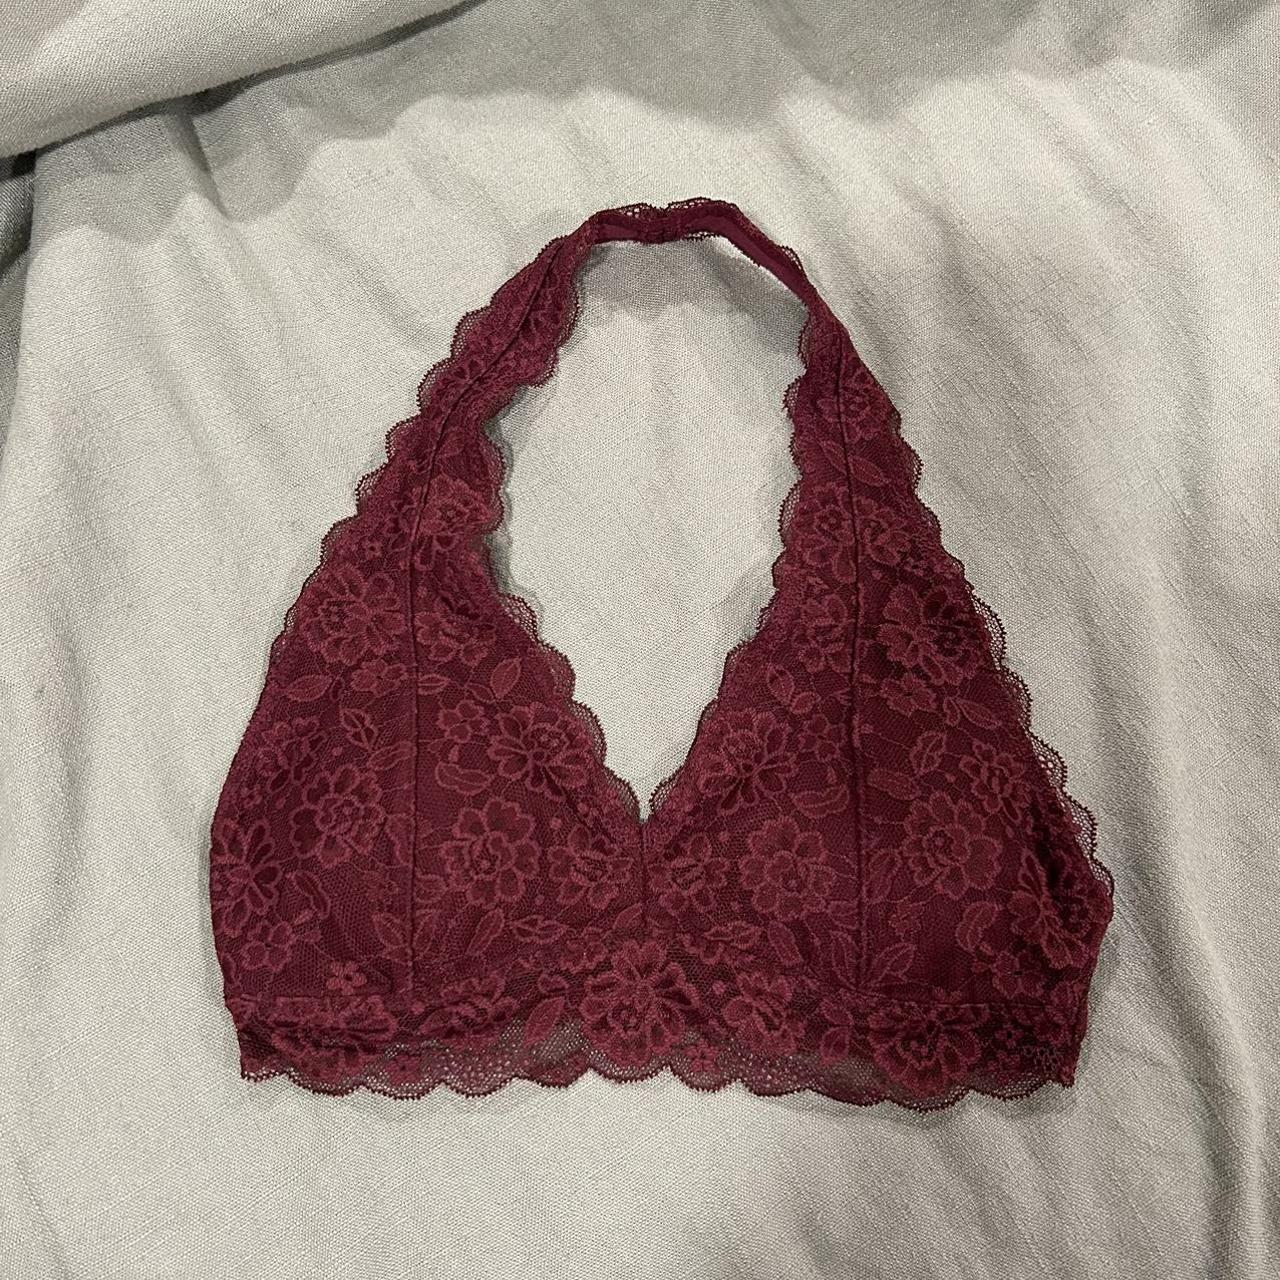 Hollister Gilly Hicks Maroon Red Lace Back Ribbed Strappy Bralette